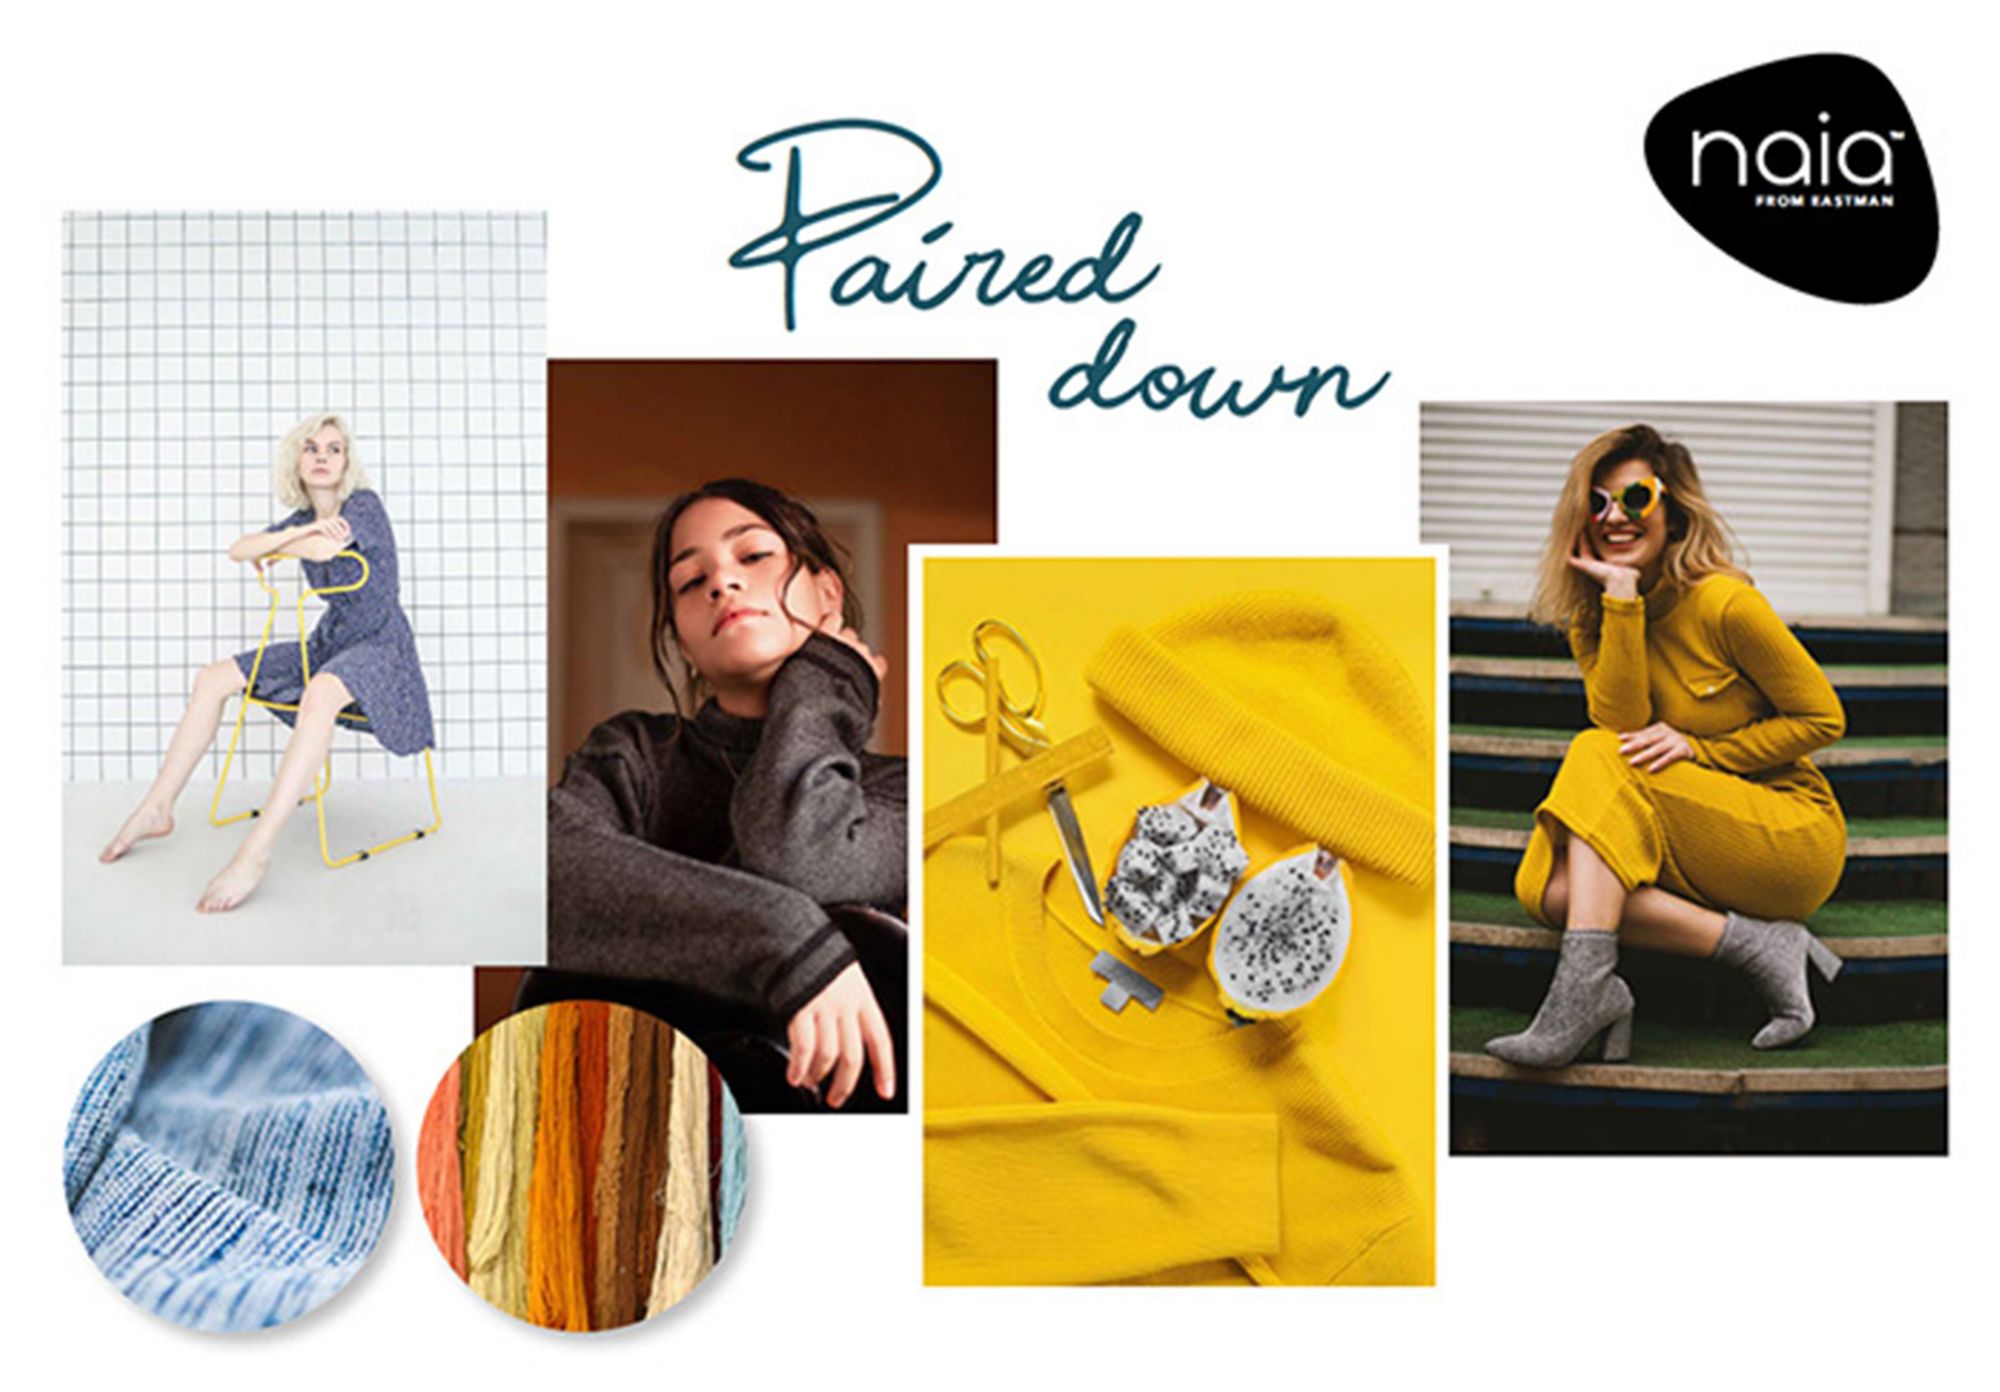 Paired down women fashion mood board 